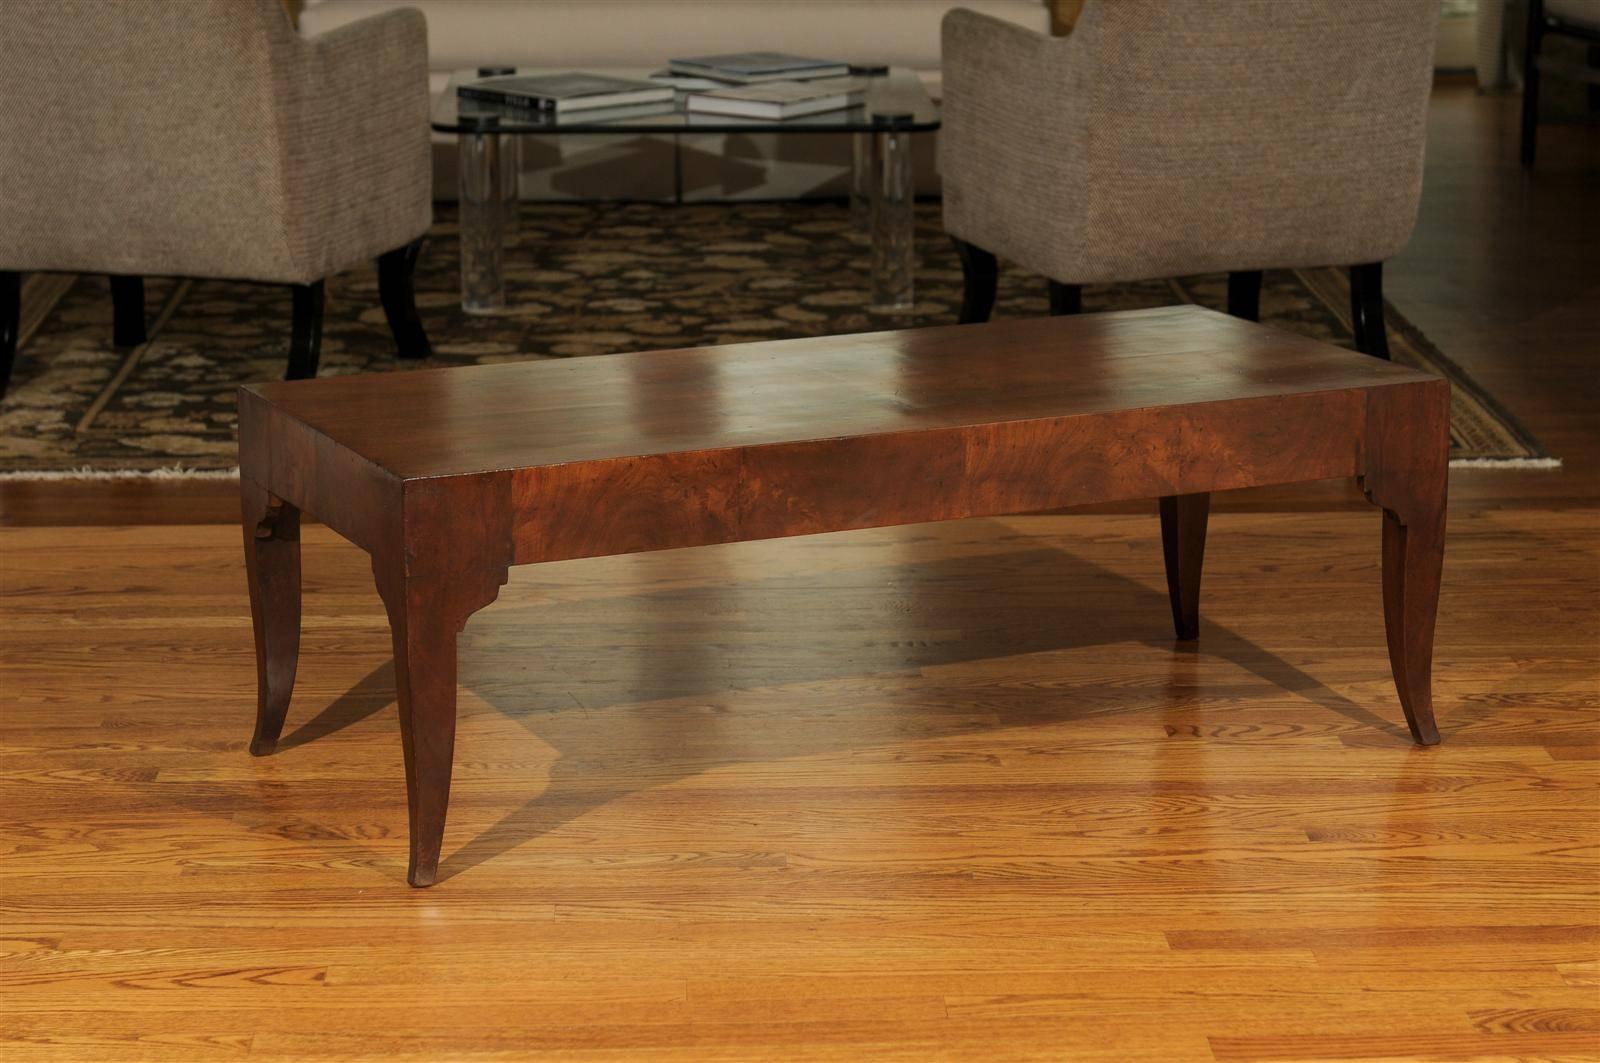 An outstanding vintage coffee table, circa 1960. Beautiful design with a fabulous leg detail, executed in bookmatch walnut veneer. Exceptional quality and craftsmanship. Exquisite jewelry! Excellent restored condition. The table has been